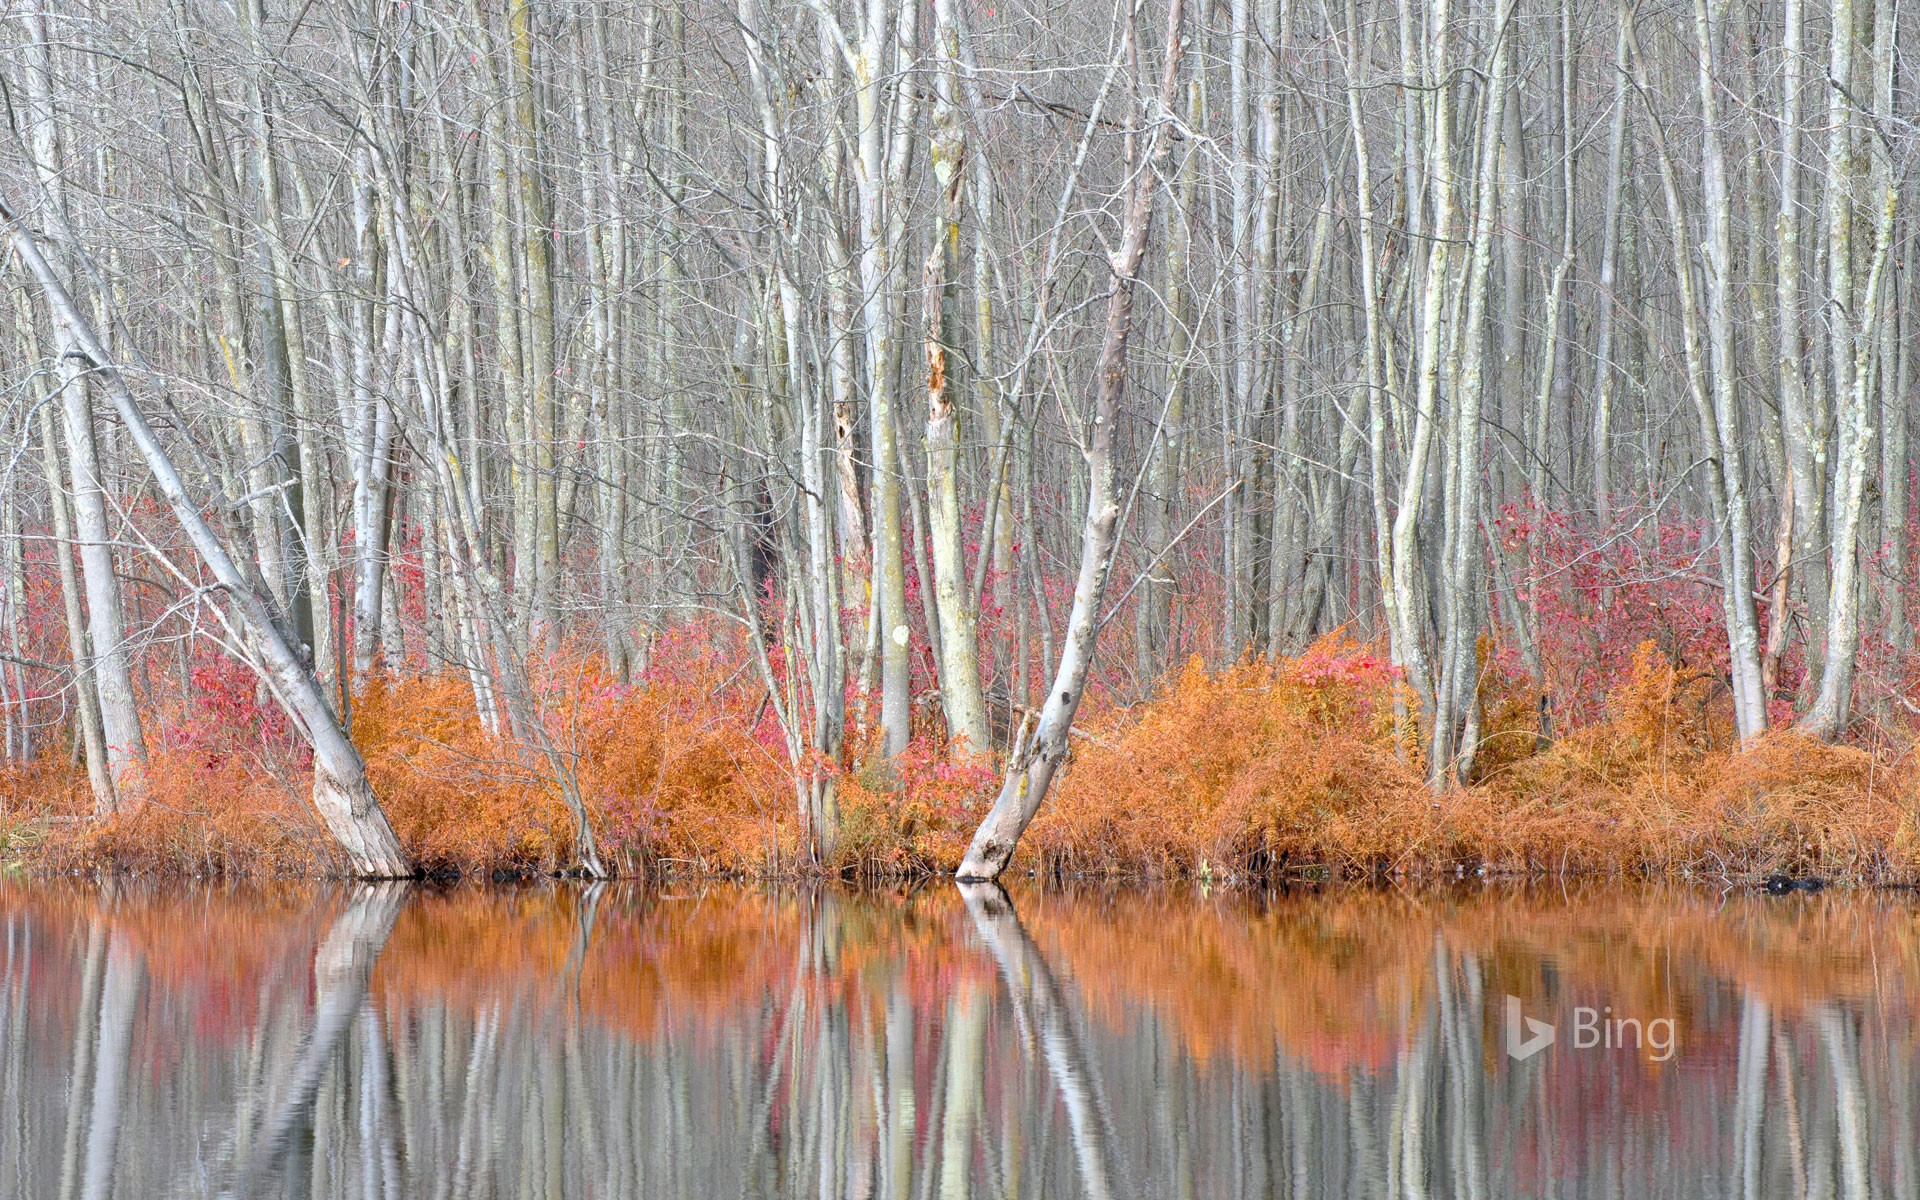 Bare trees and autumn ferns in Beaver Lake Nature Center, New York